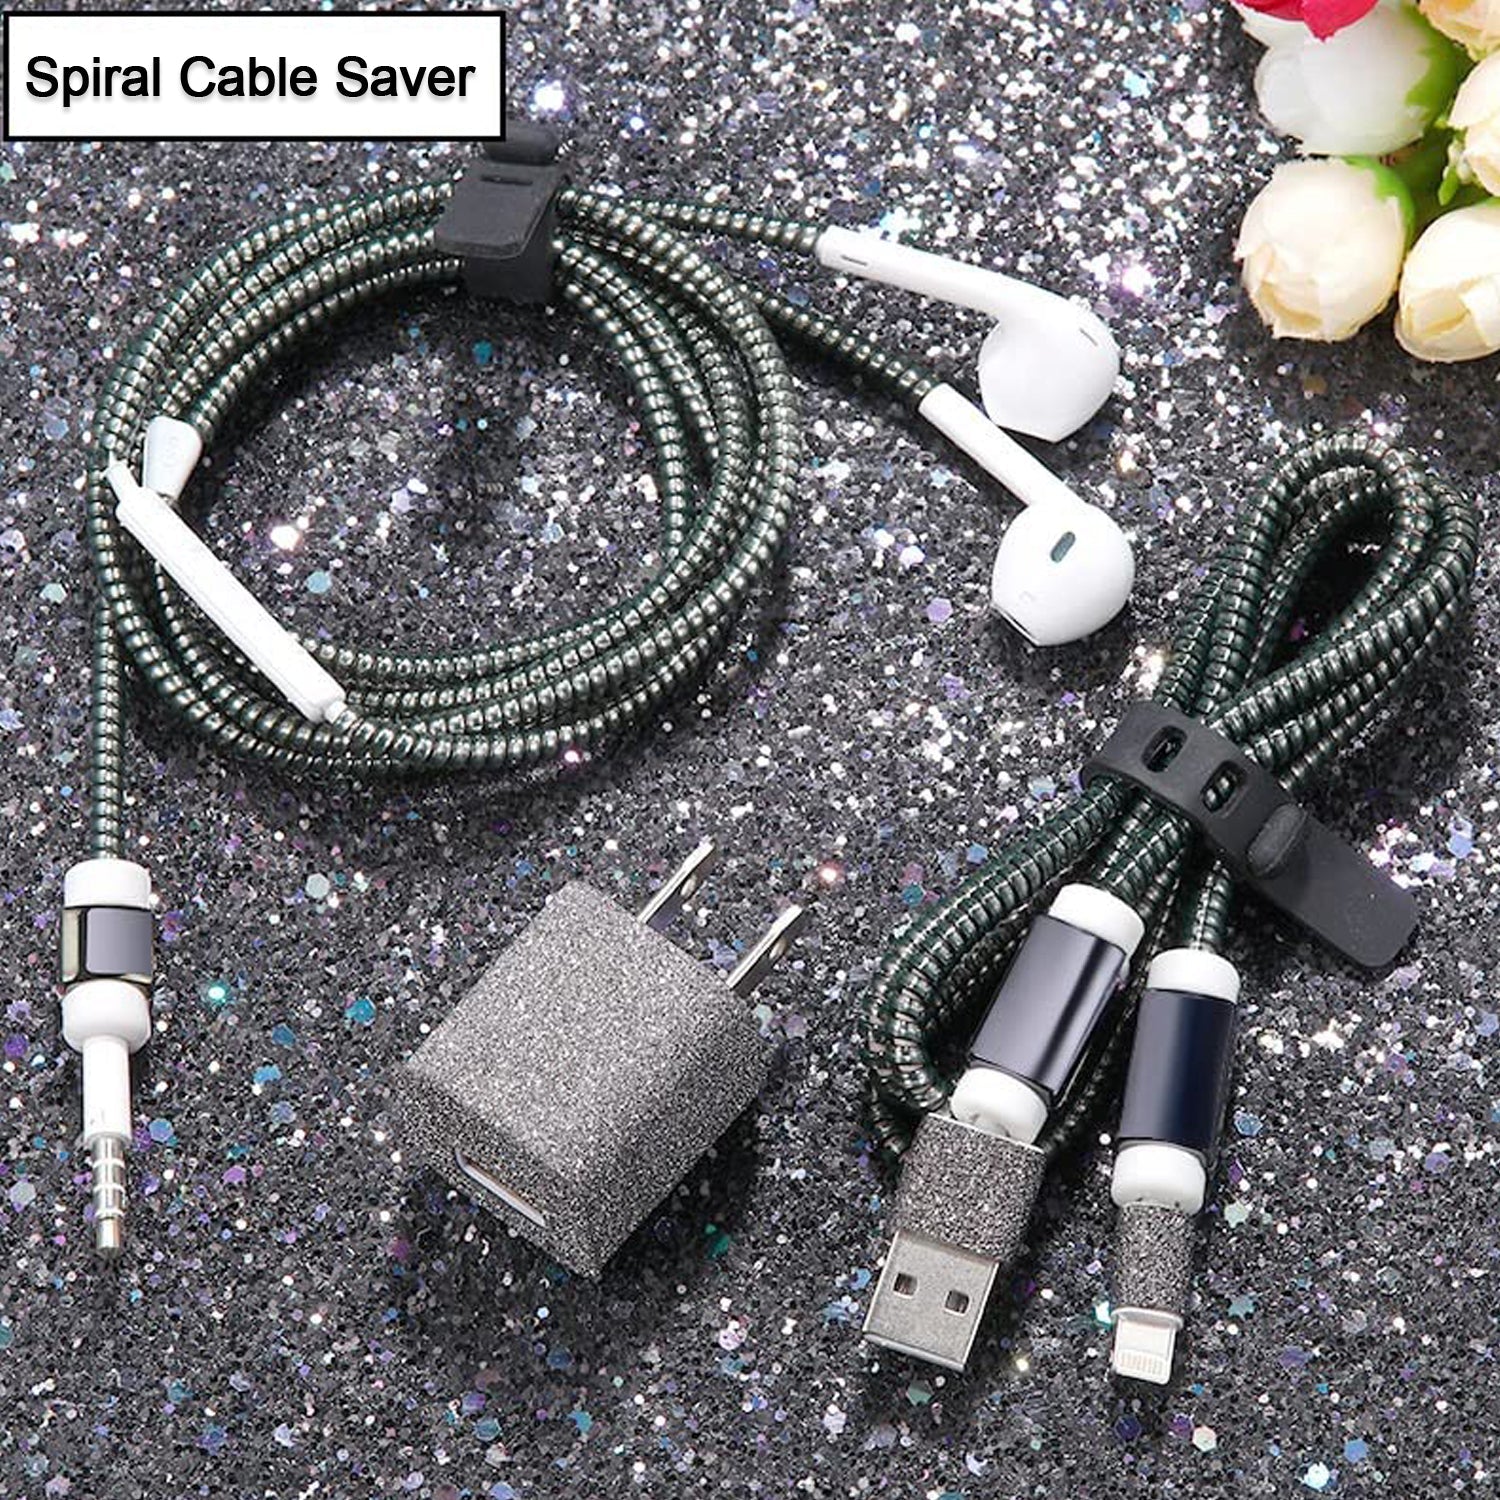 6011 Metallic Finish Cable Spiral Protector/Wire Repair/Pet Cord Protector/Headphone Saver, Cable Wrap/Cover for Mac Charging Cable DeoDap